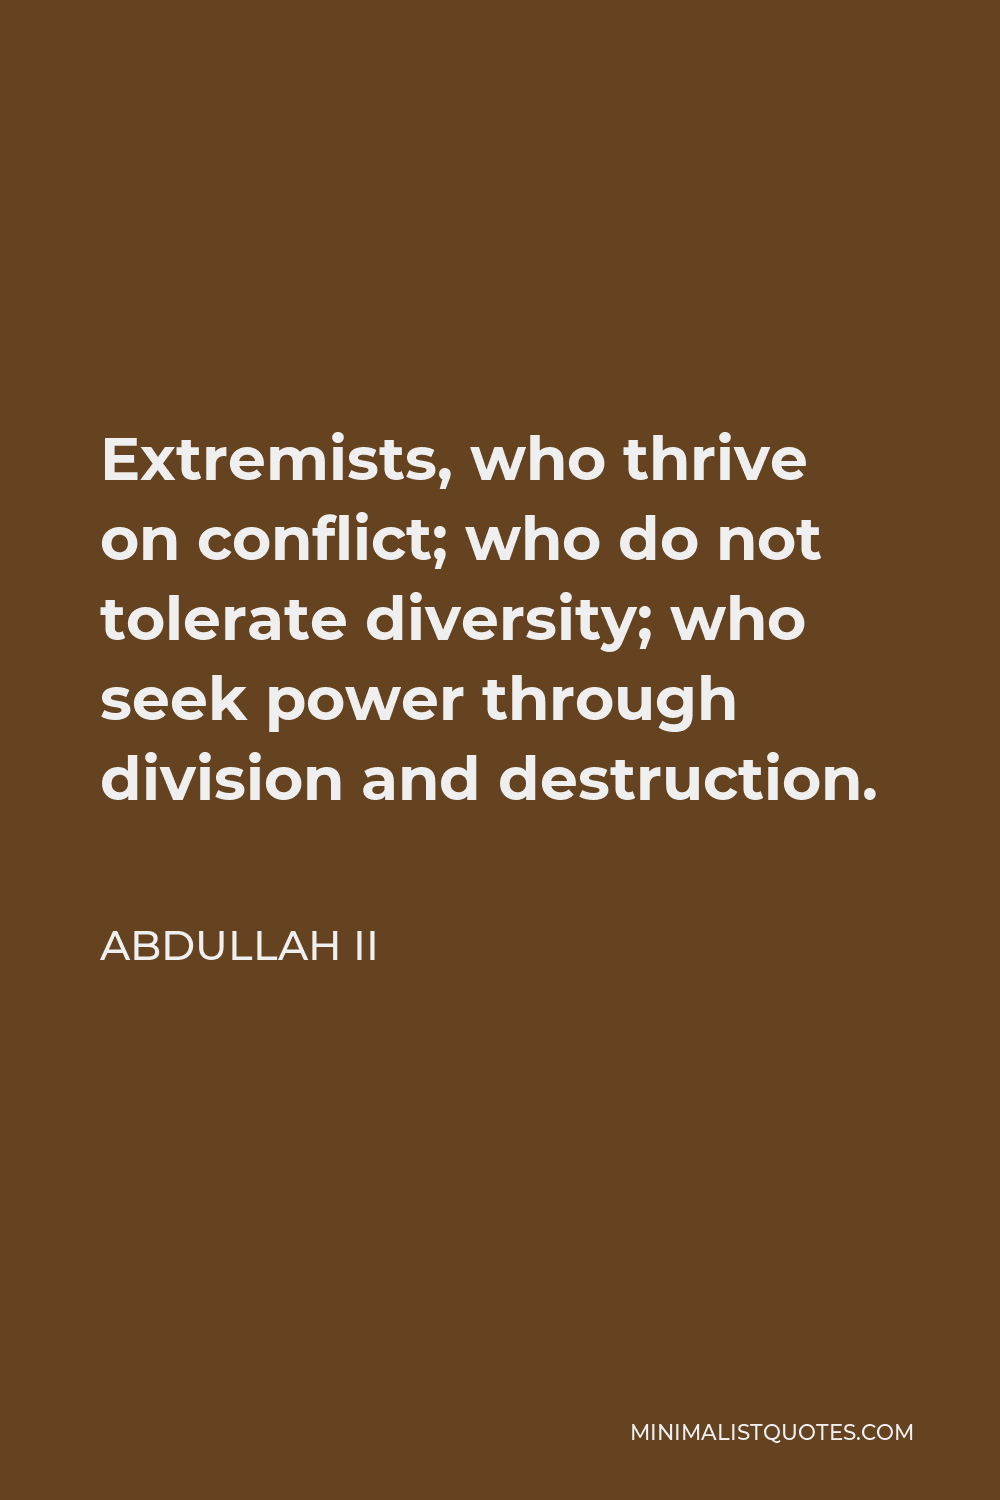 Abdullah II Quote - Extremists, who thrive on conflict; who do not tolerate diversity; who seek power through division and destruction.